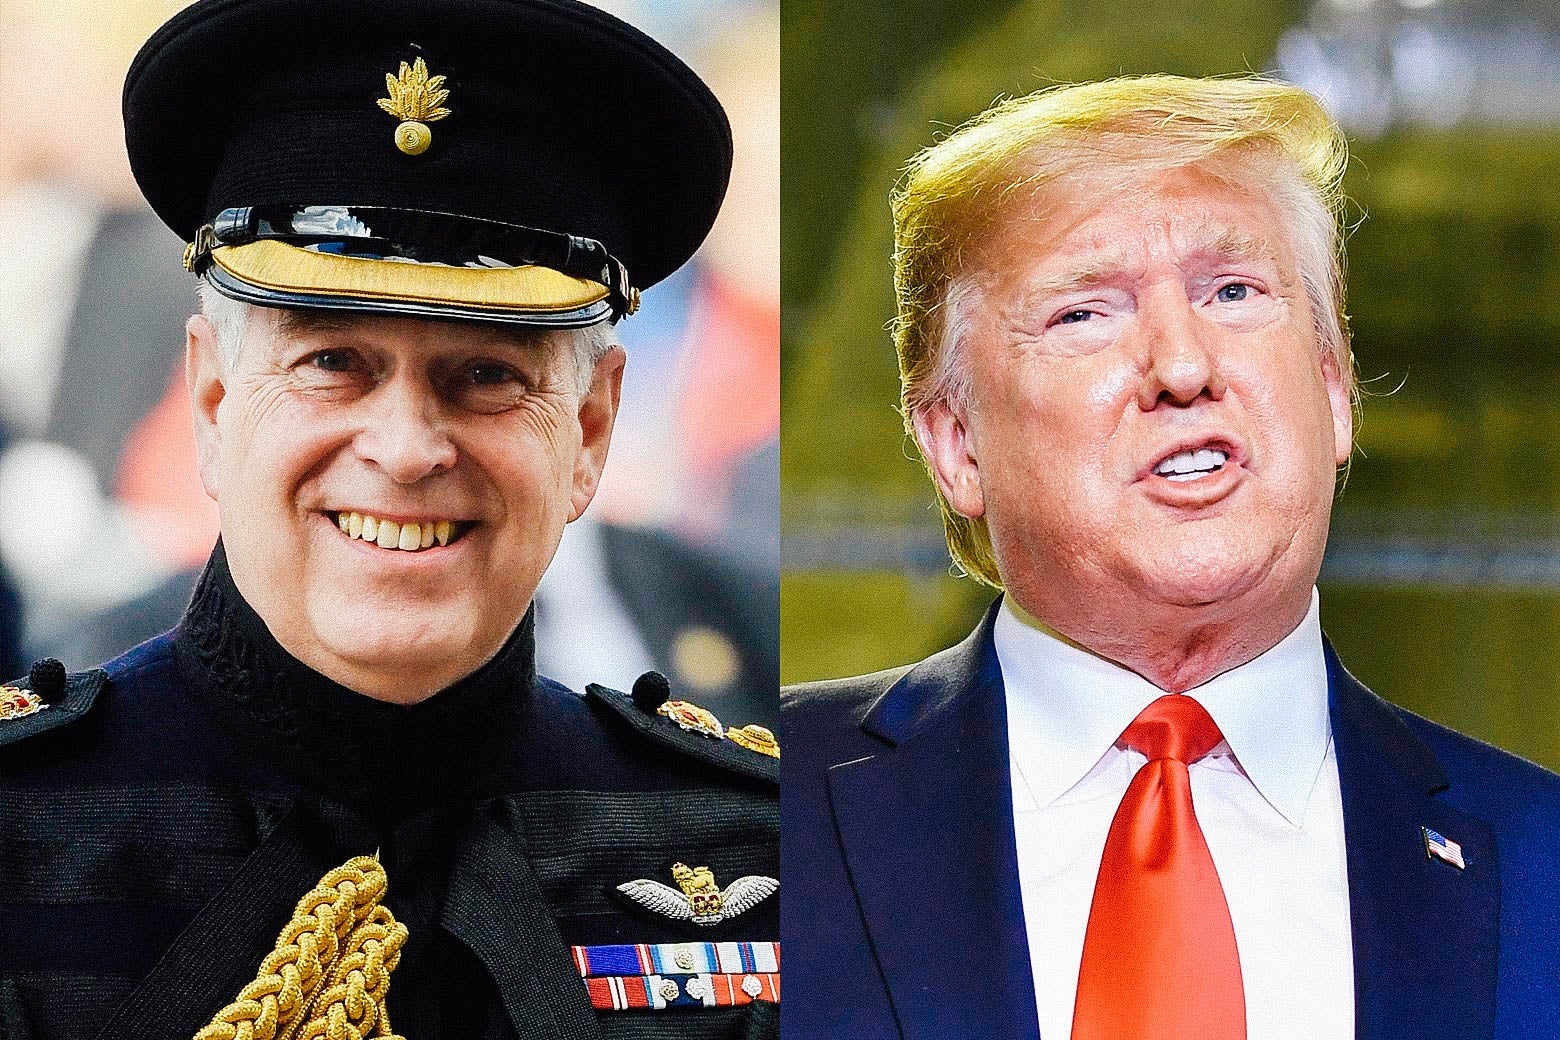 A side-by-side image of Prince Andrew and Donald Trump